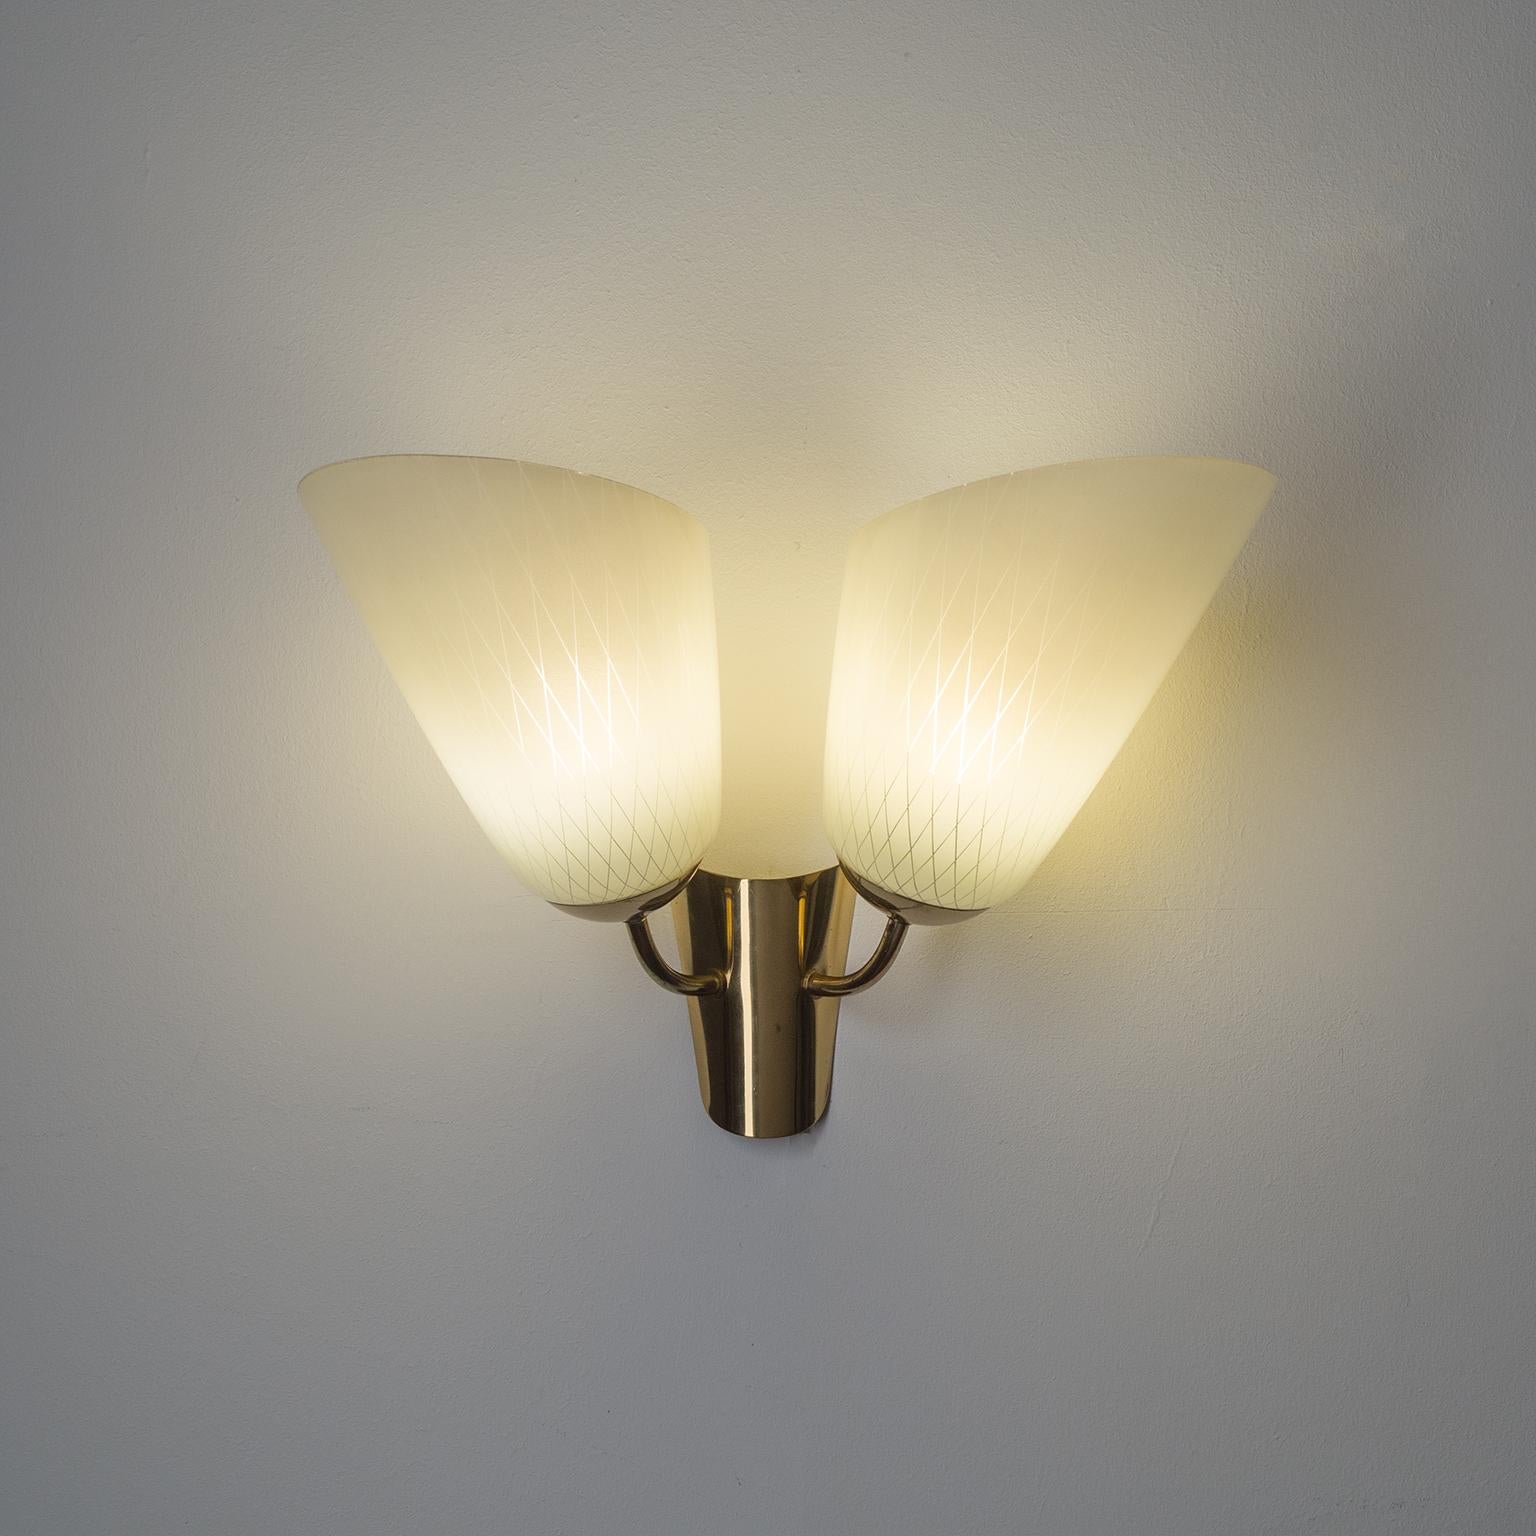 Two-Arm Wall Lamp, 1940s, Enameled Glass and Brass 6